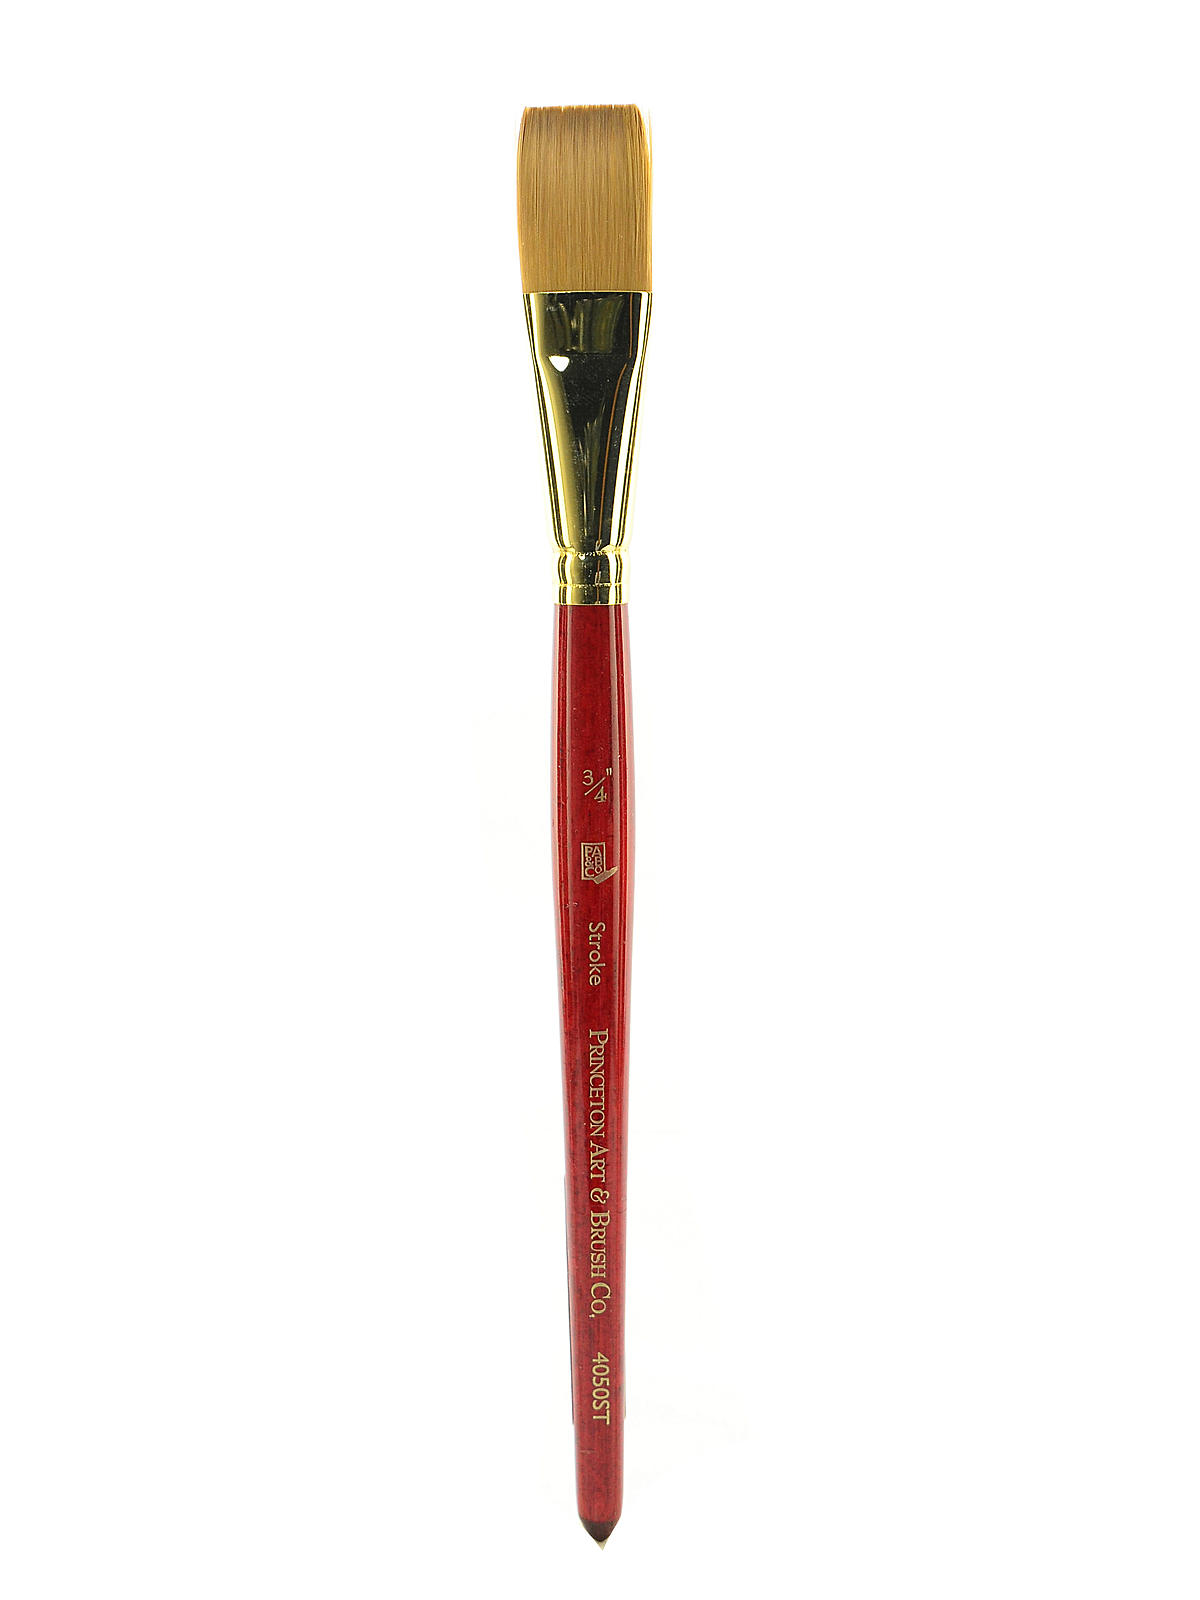 Series 4050 Heritage Best Synthetic Sable Brushes 3 4 In. Short Handle Stroke